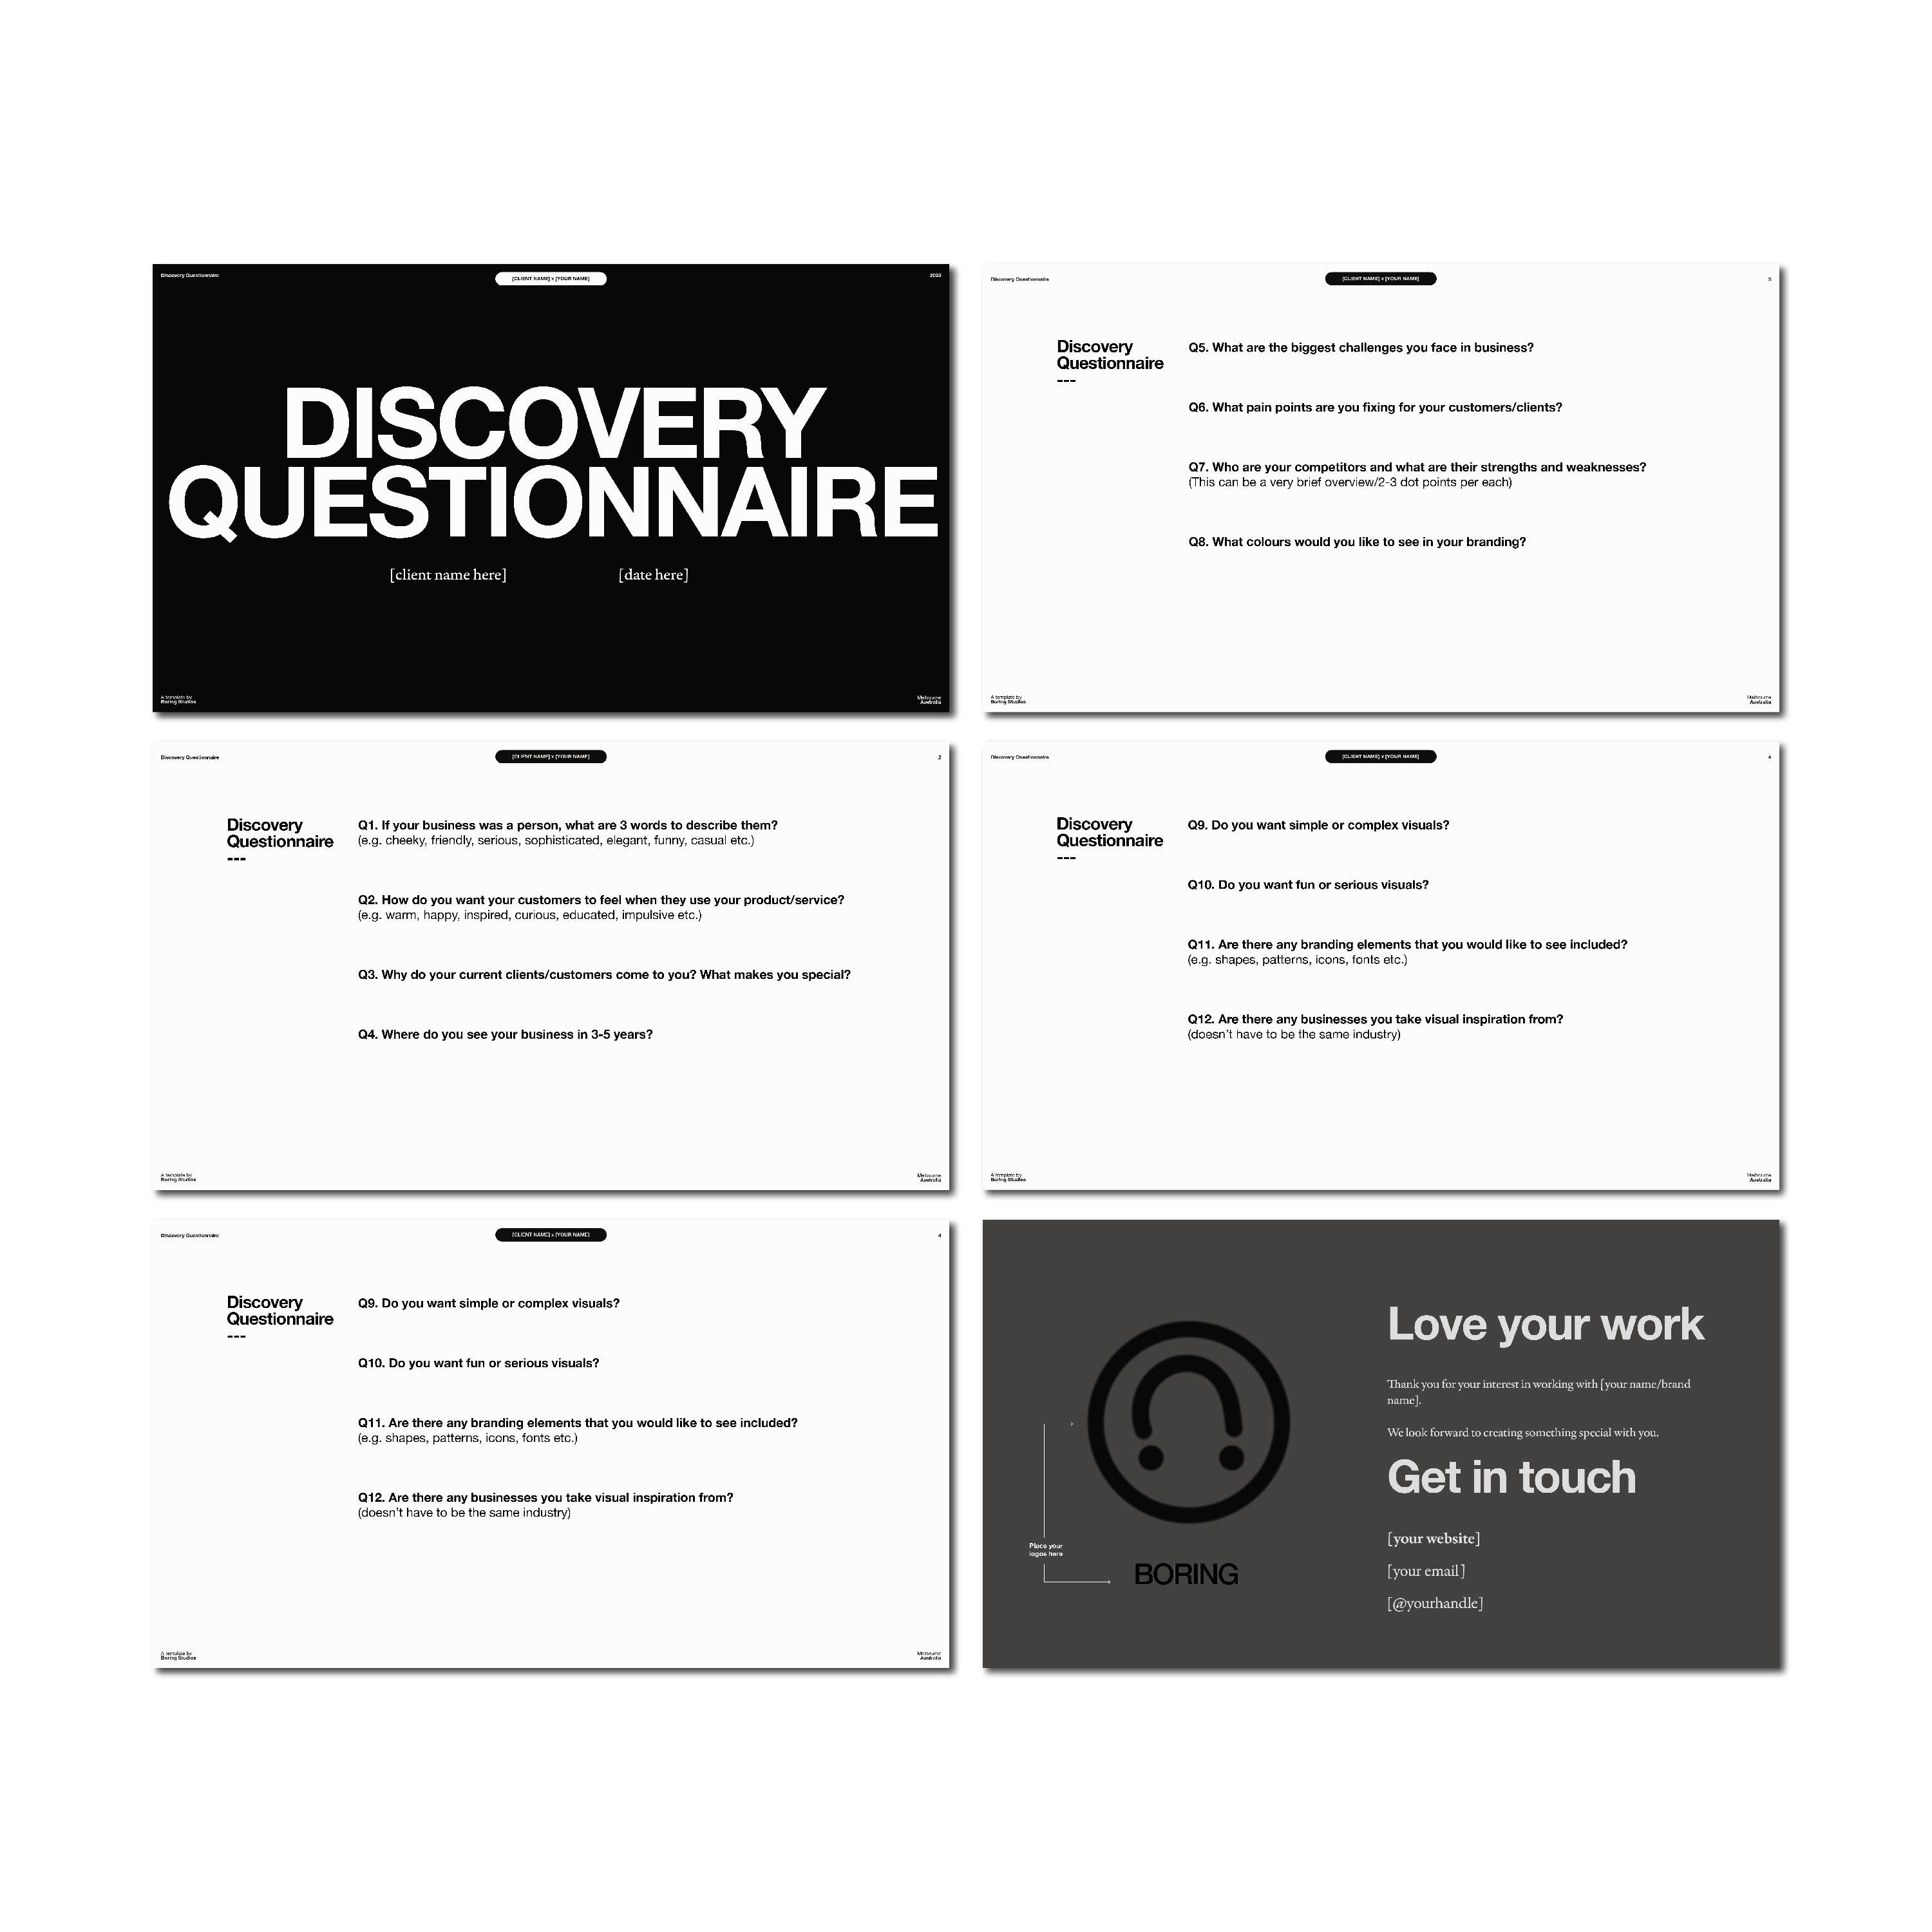 Discovery Questionnaire